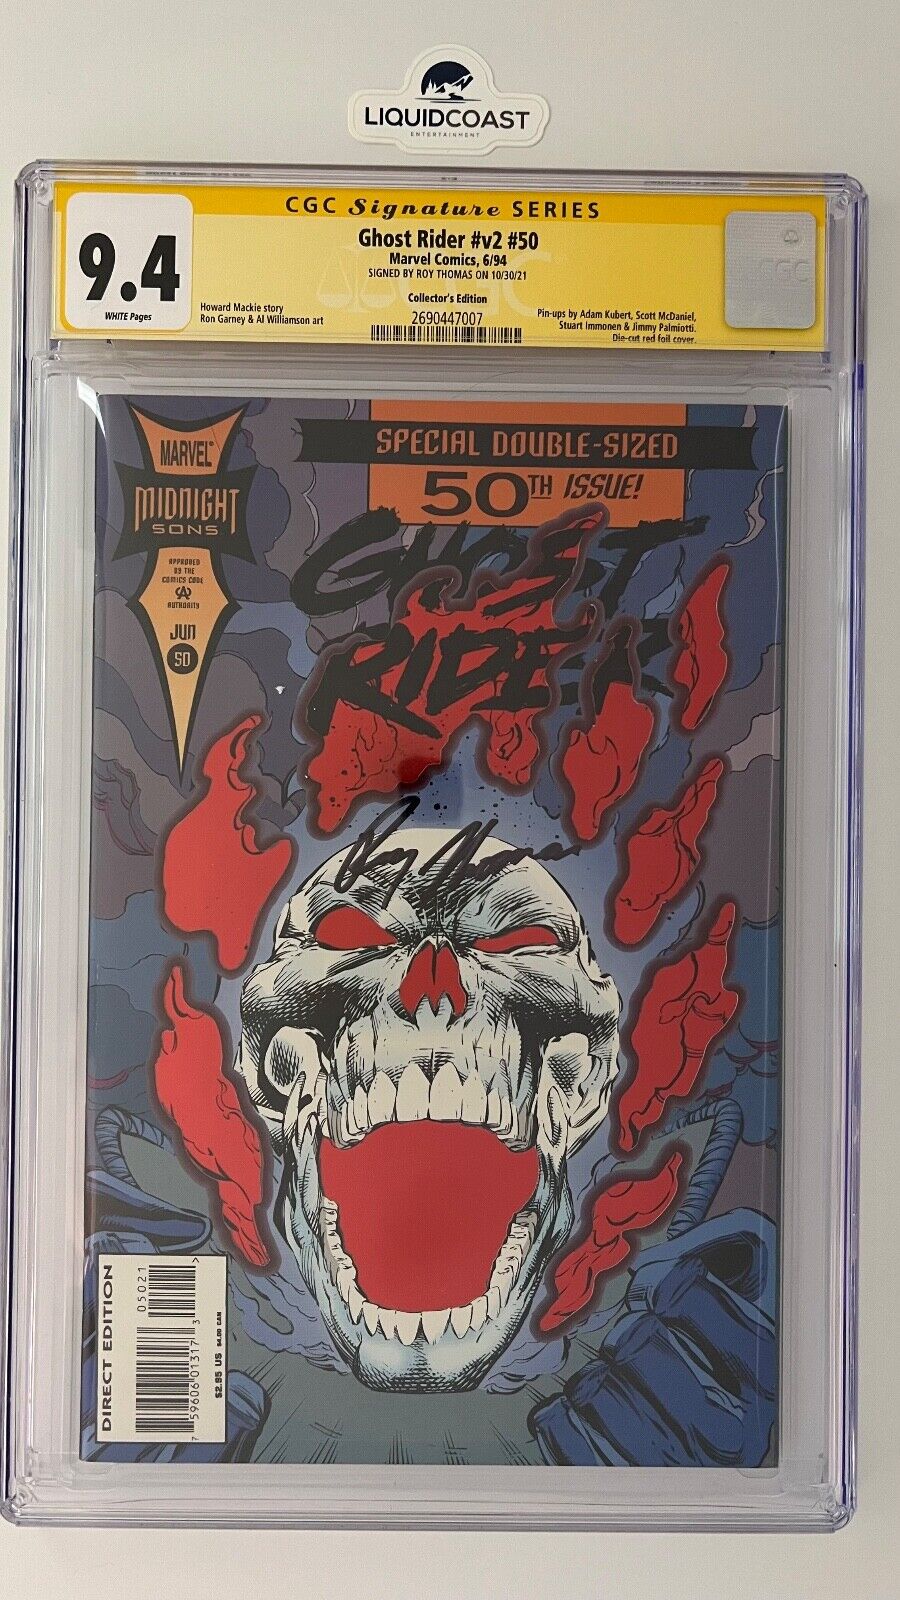 Ghost Rider #50 SS CGC 9.4 signed by Roy Thomas